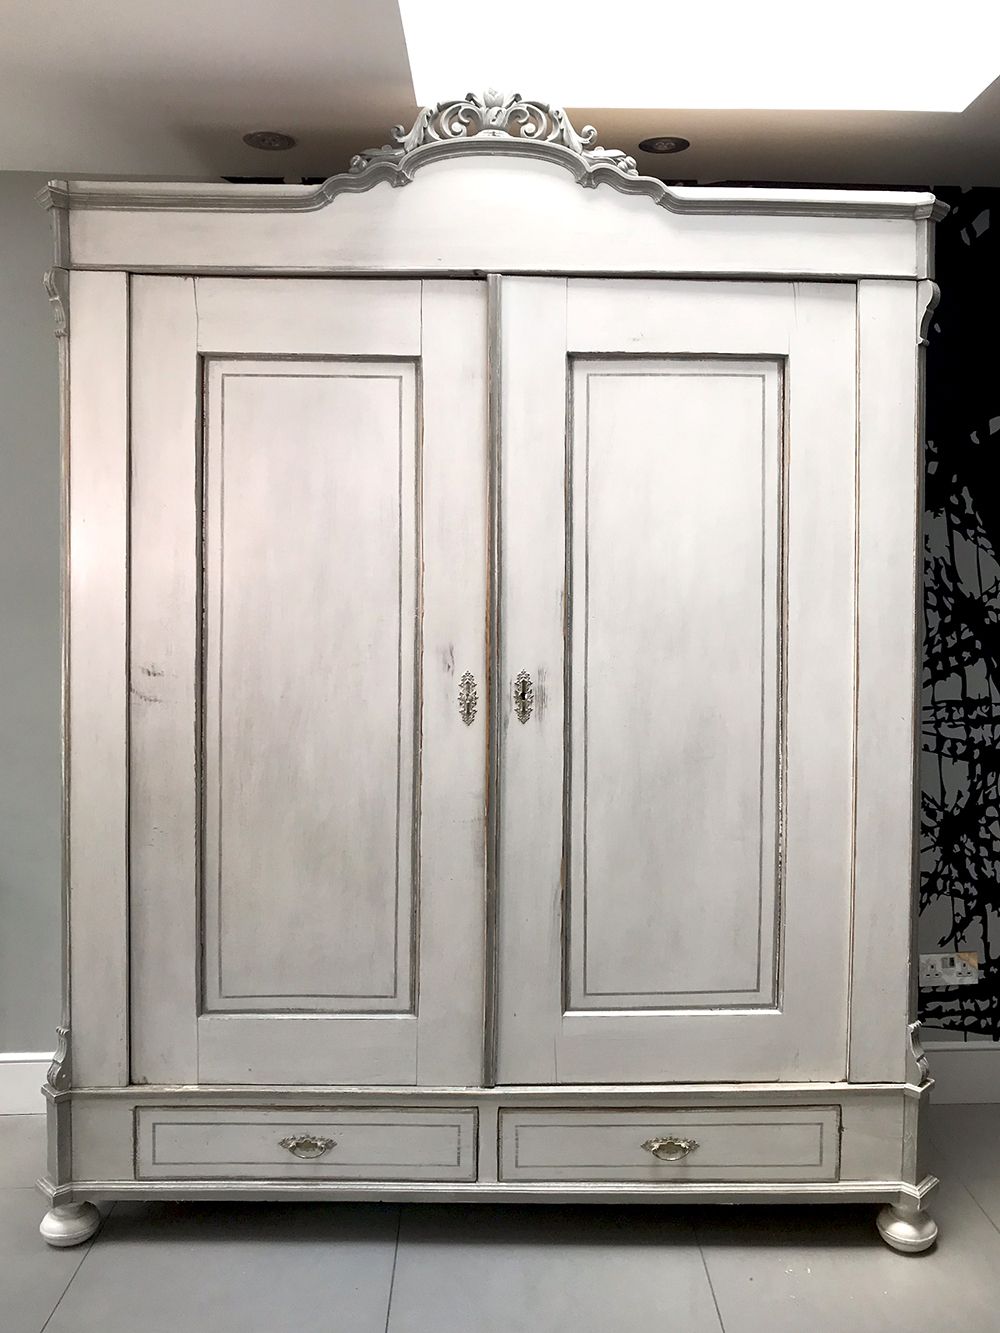 Antique French Painted Armoire – Sold | Napoleonrockefeller – Vintage And  Retro Furniture, Bespoke Hand Crafted Chairs And Seating Pertaining To Antique French Wardrobes (Photo 5 of 15)